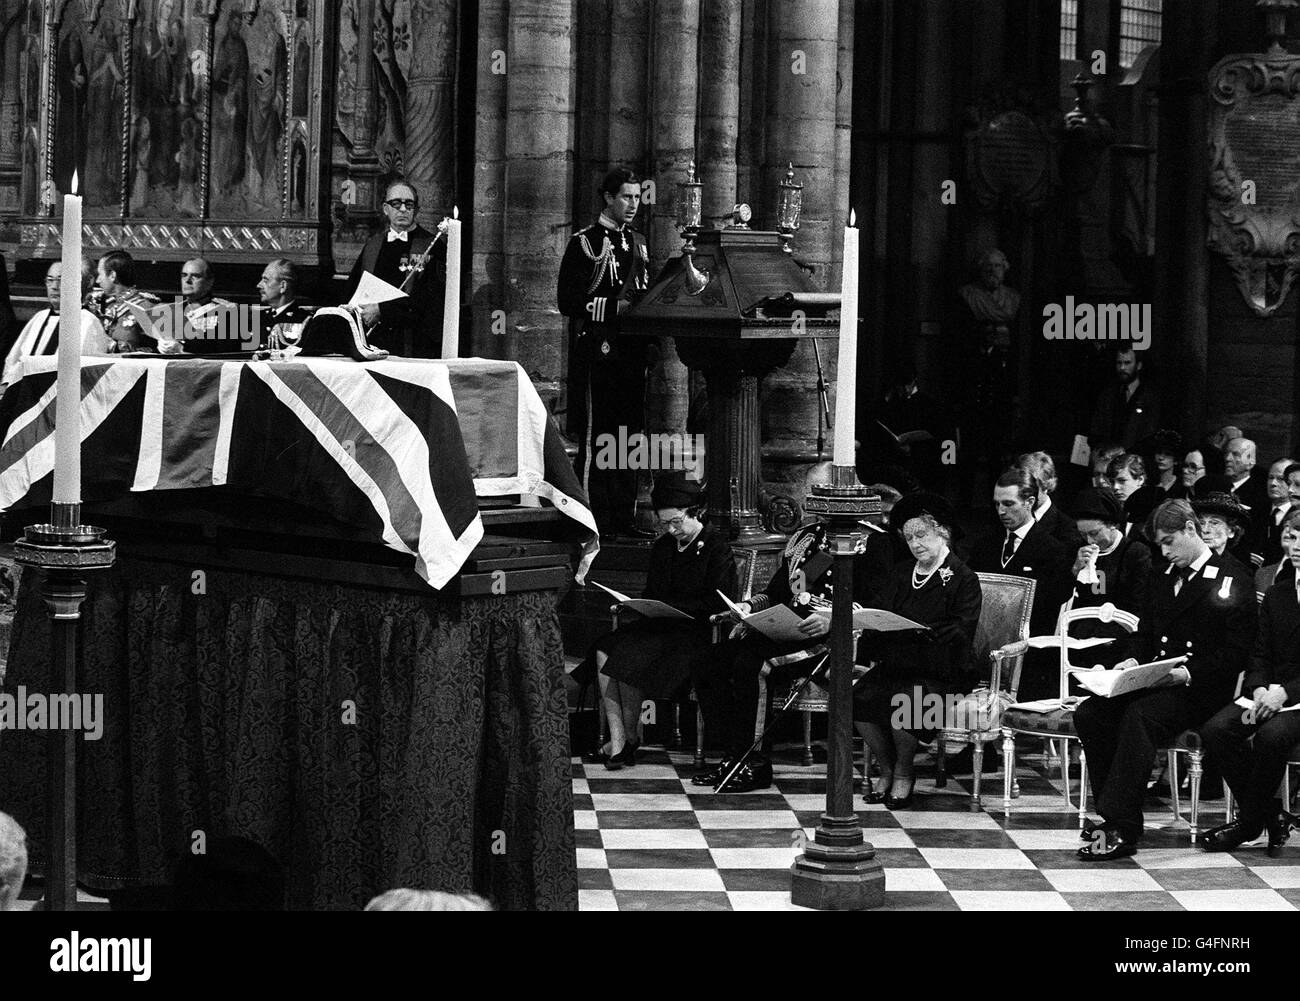 PA NEWS PHOTO 5/9/79 THE PRINCE OF WALES GIVES HIS SPEECH AT THE FUNERAL SERVICE OF THE EARL MOUNTBATTEN AT WESTMINSTER ABBEY, LONDON Stock Photo